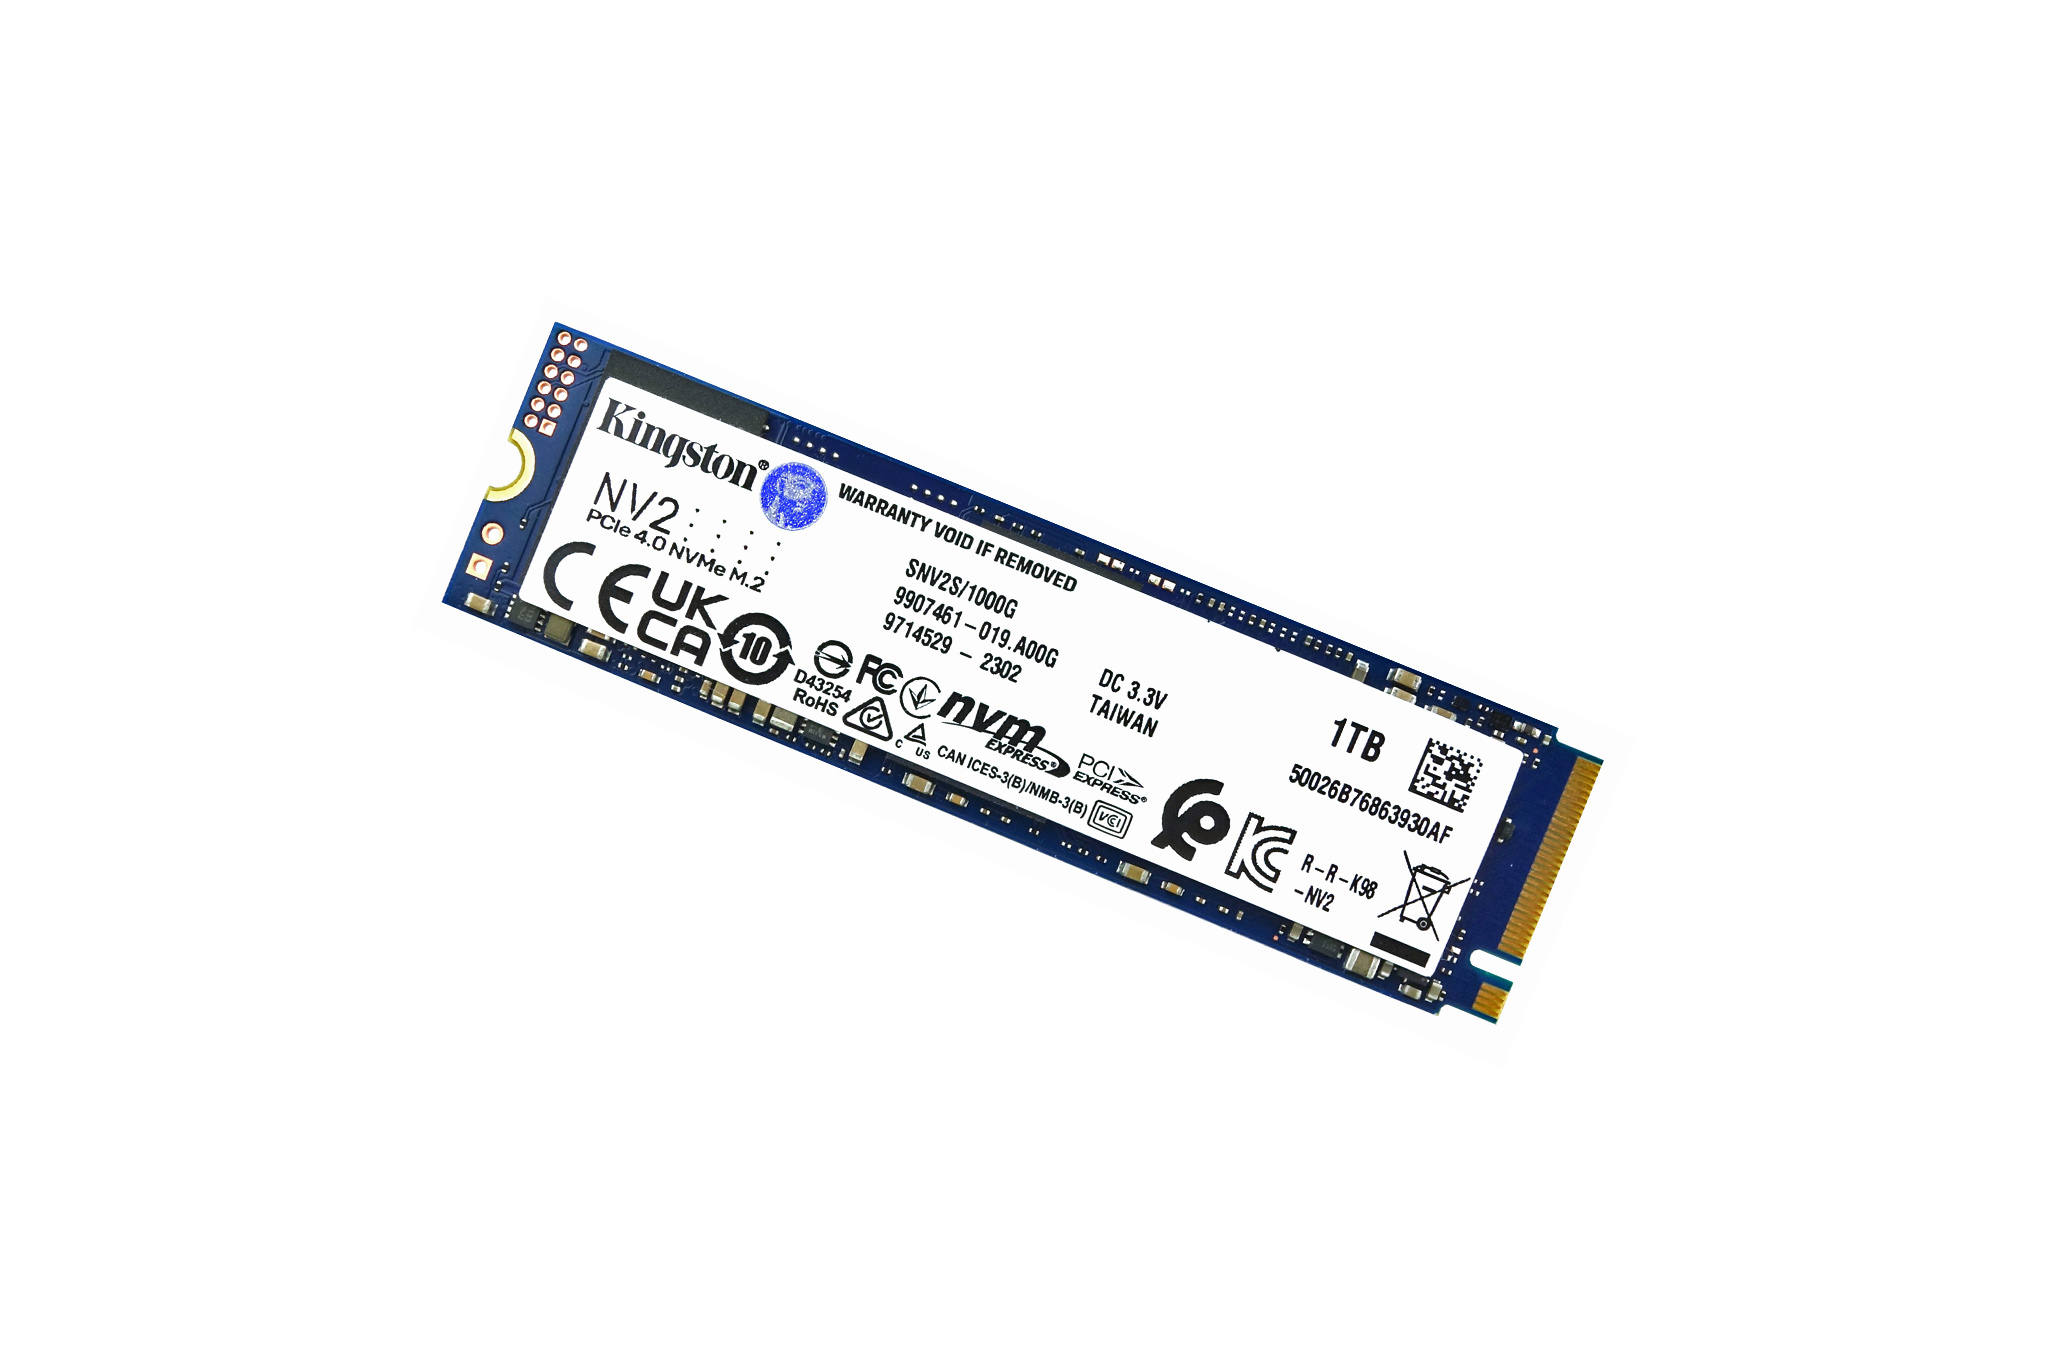 Kingston NV2 M.2 1TB PCIe 4.0 3500 MB/s solid state drive (SNV2S/1000G)